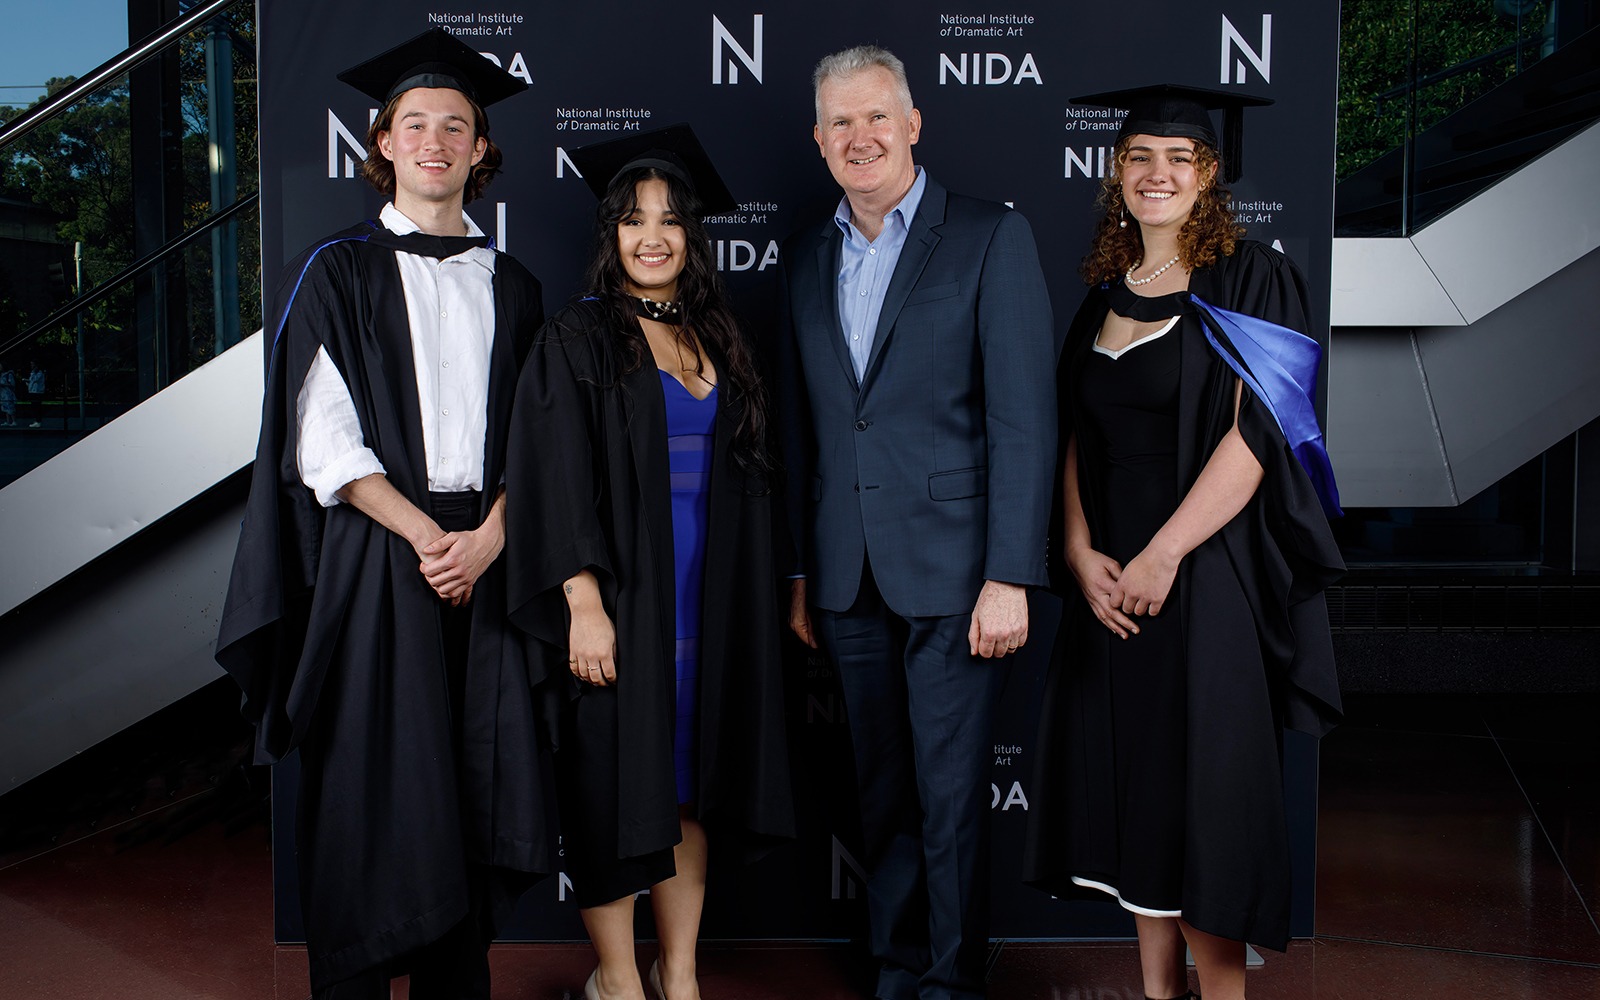 From left to right: Noel Staunton (NIDA Chair), Liz Hughes (NIDA CEO), Annette Shun Wah (Honorary Degree recipient), The Hon. Tony Burke MP (Minister for Employment and Workplace Relations and Minister for the Arts) 